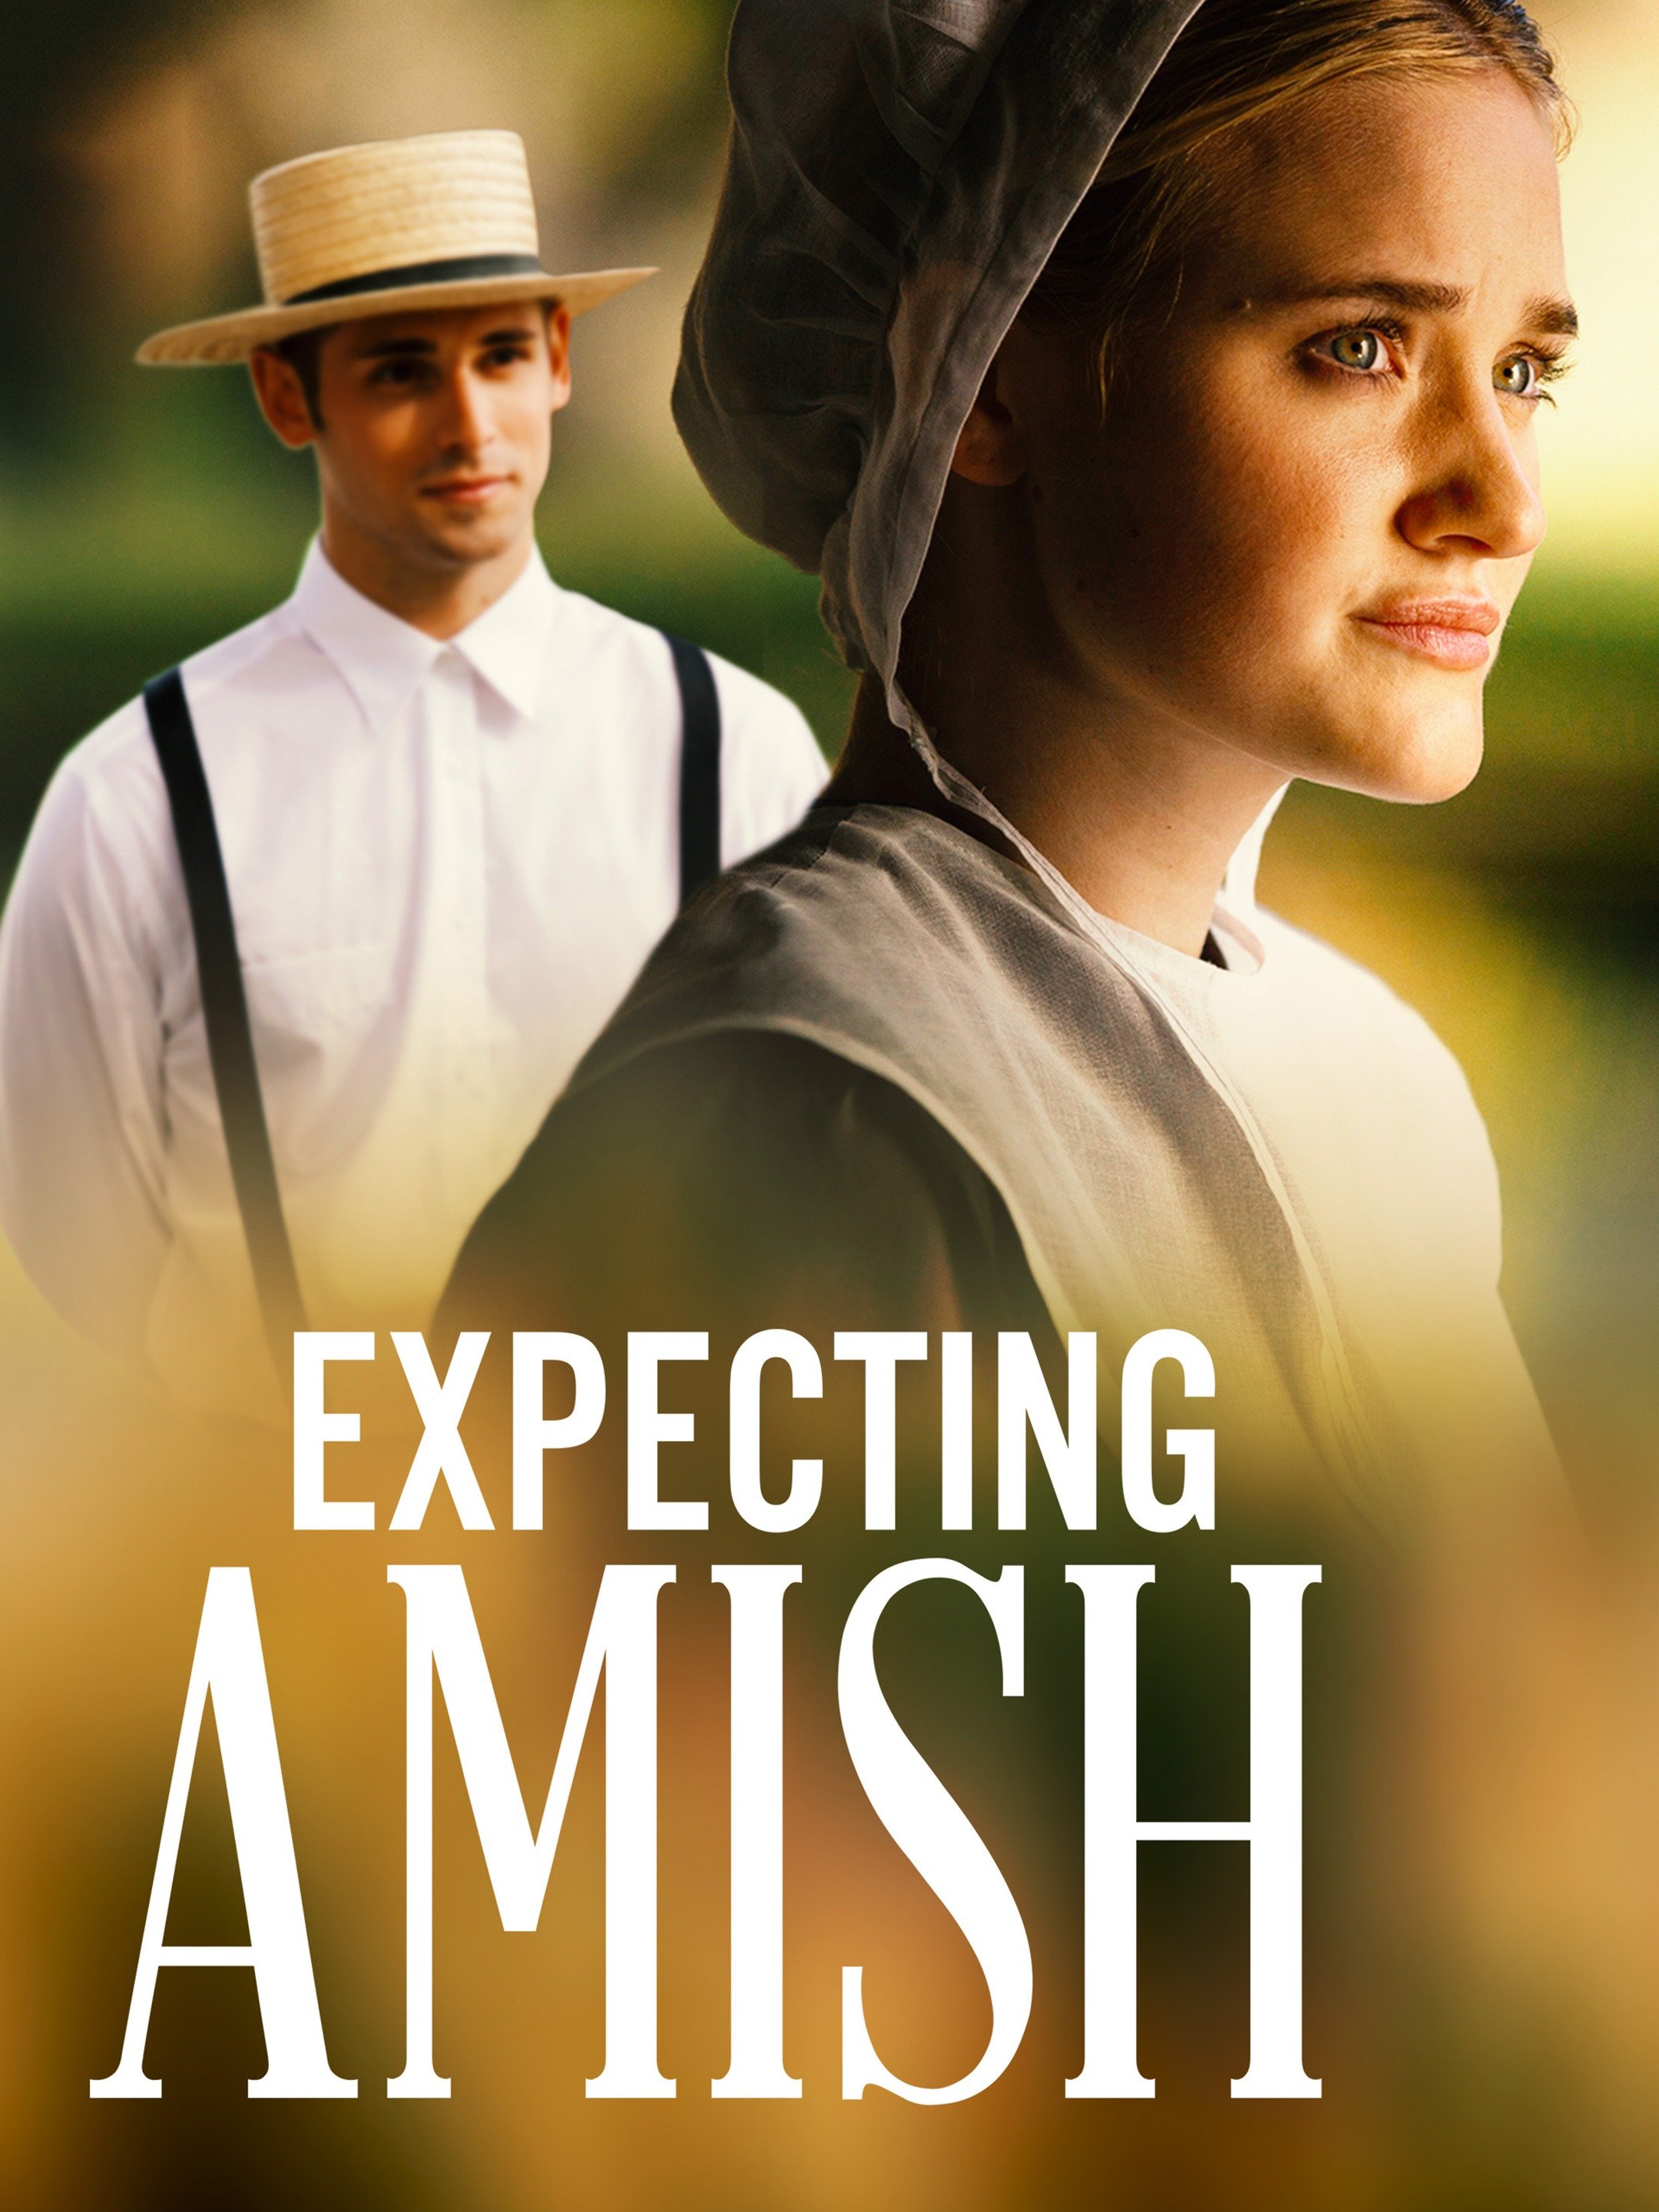 Expecting Amish (2014) - Rotten Tomatoes